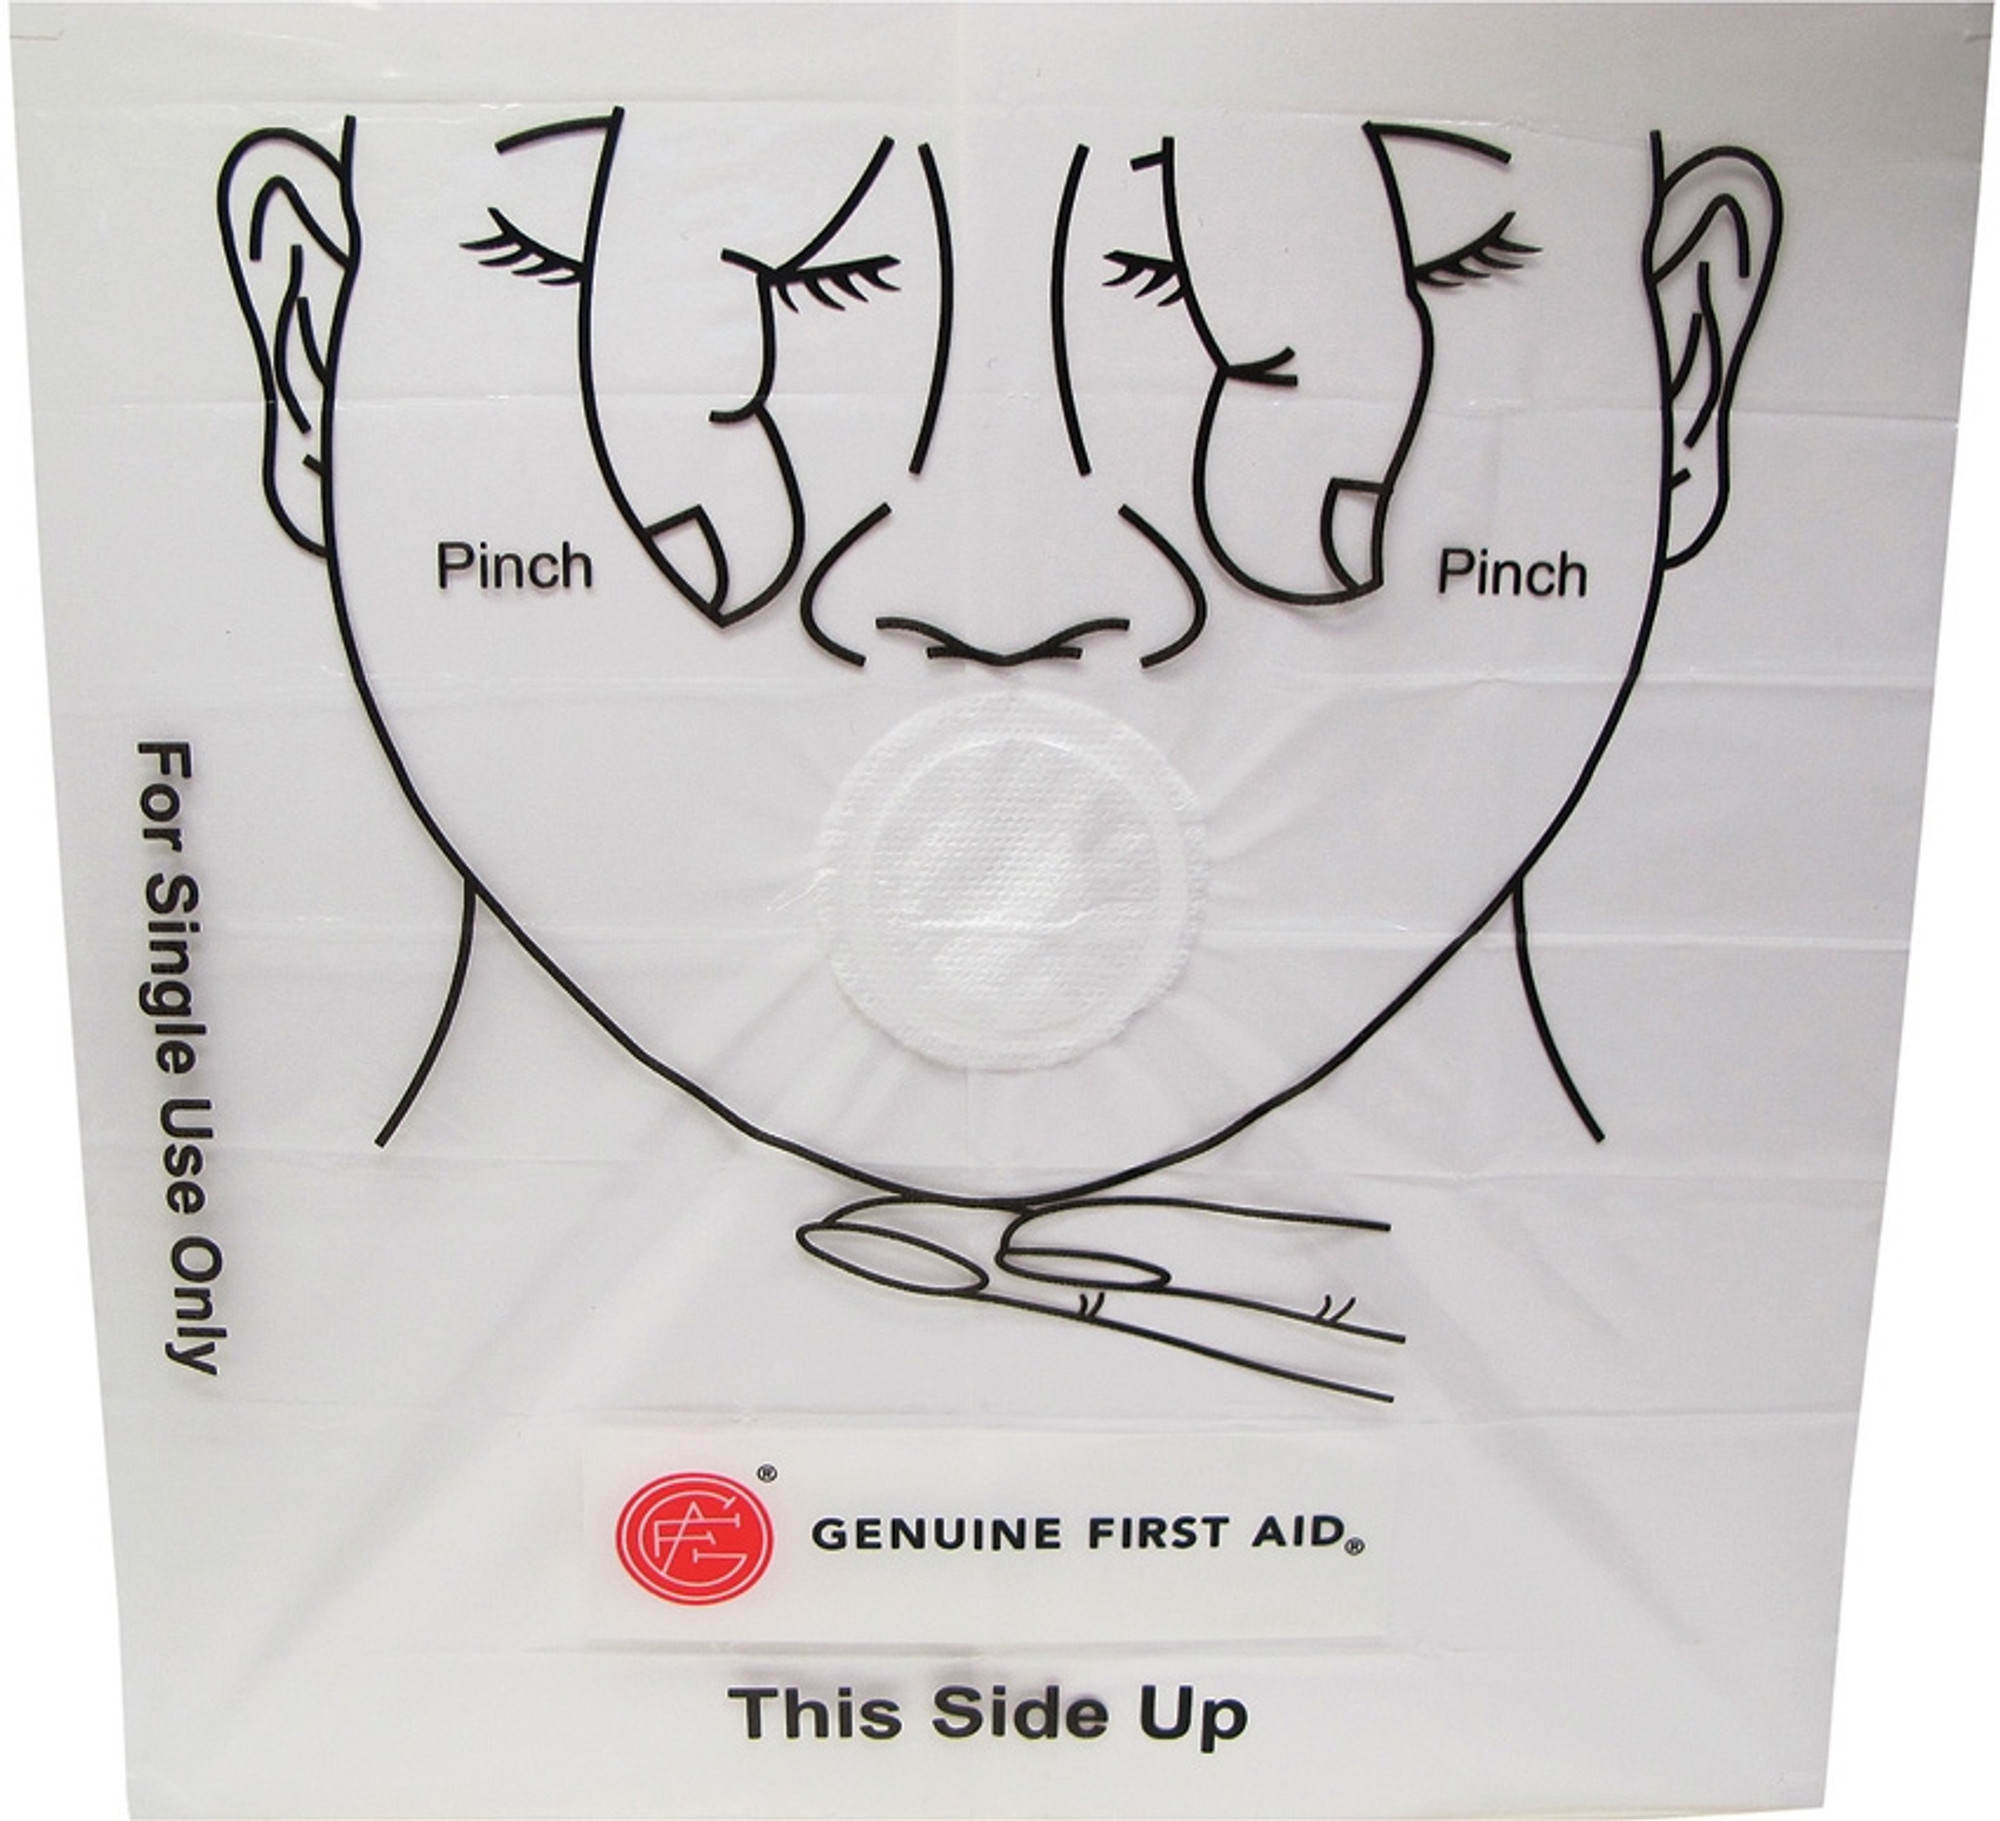 CPR Face Shield